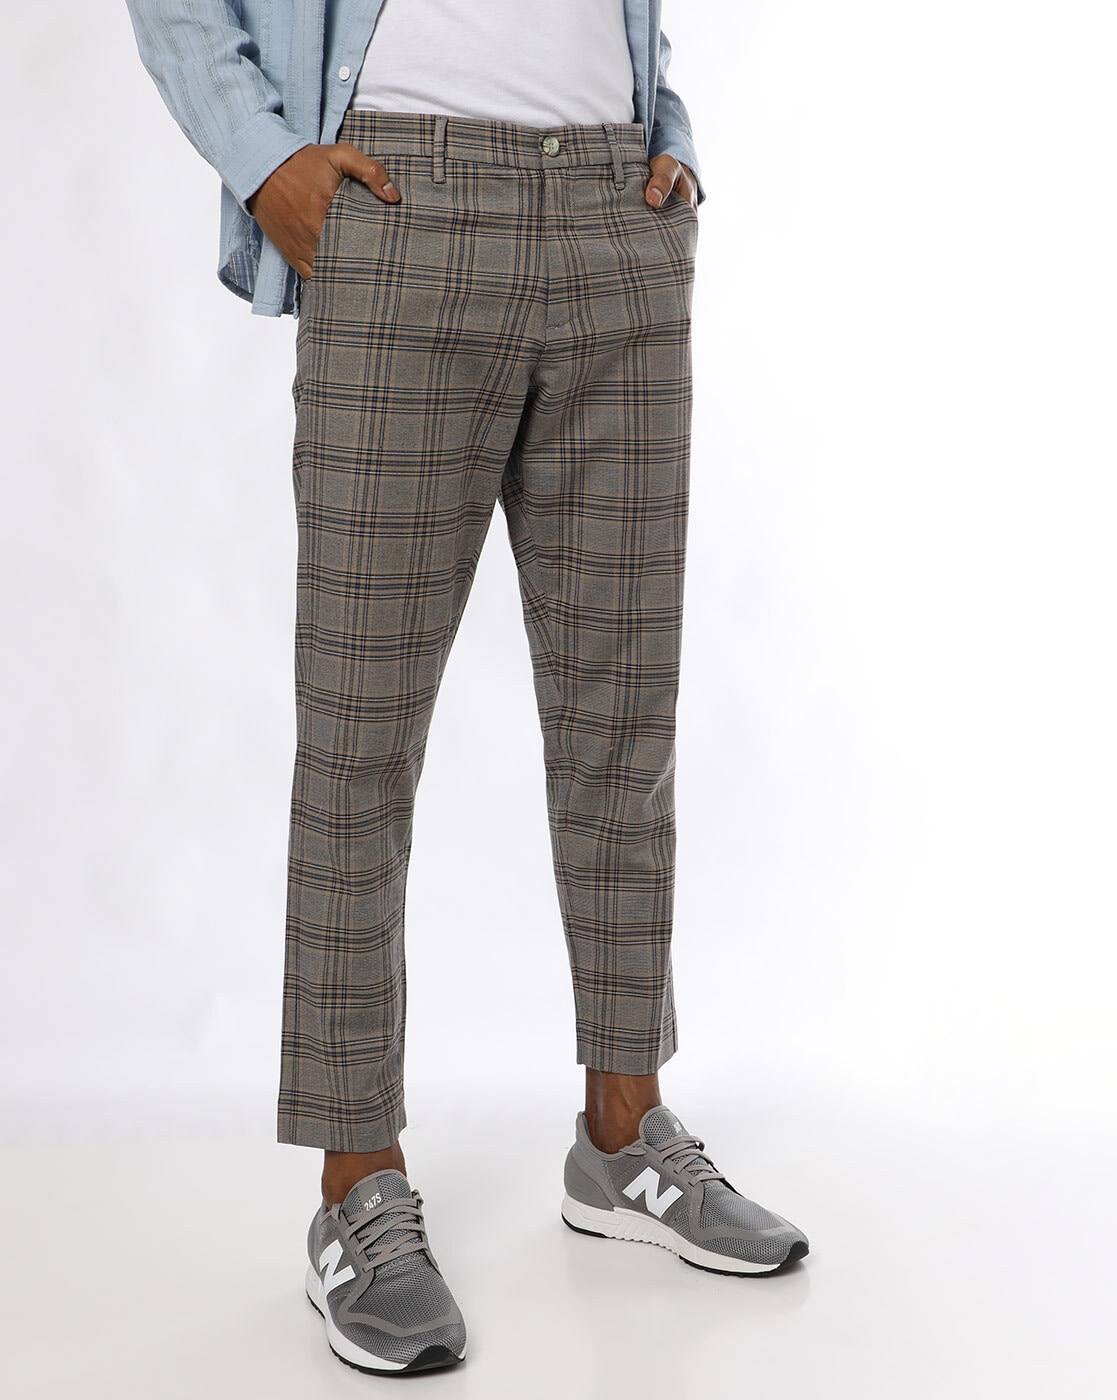 Mens Casual Pants Slim Fit Stretch Skinny Flat-Front Striped Plaid Dress  Pants Stylish Checkered Business Chinos Trousers Dark Blue at Amazon Men's  Clothing store